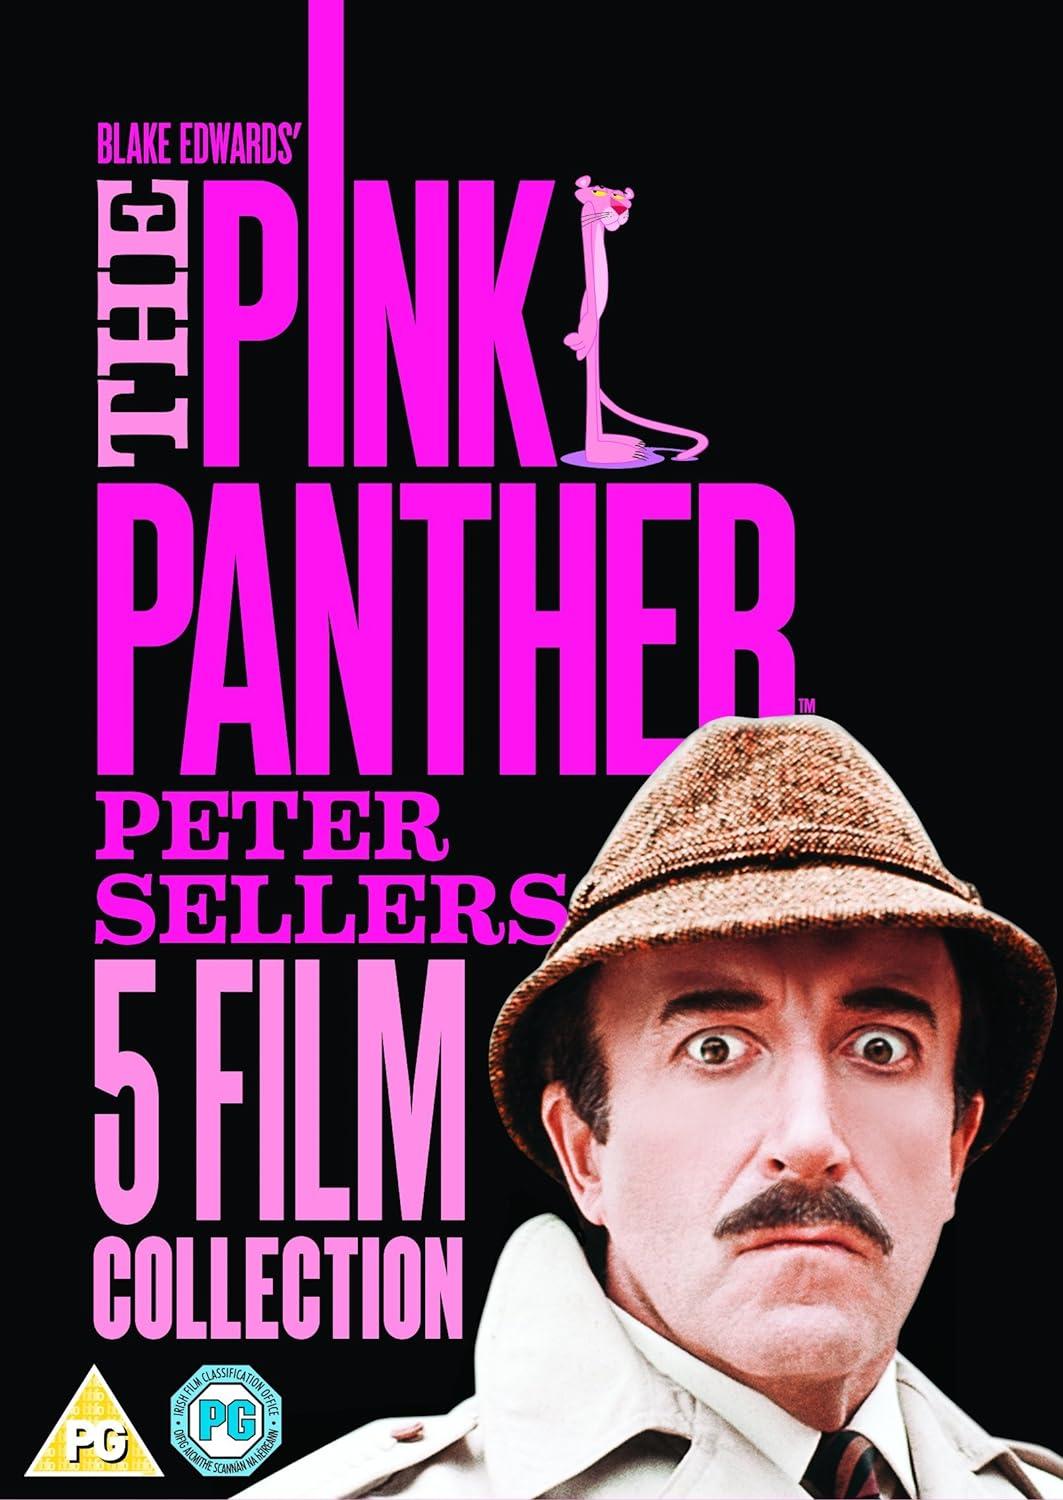 Pink Panther Film Collection (2014) DVD BOX